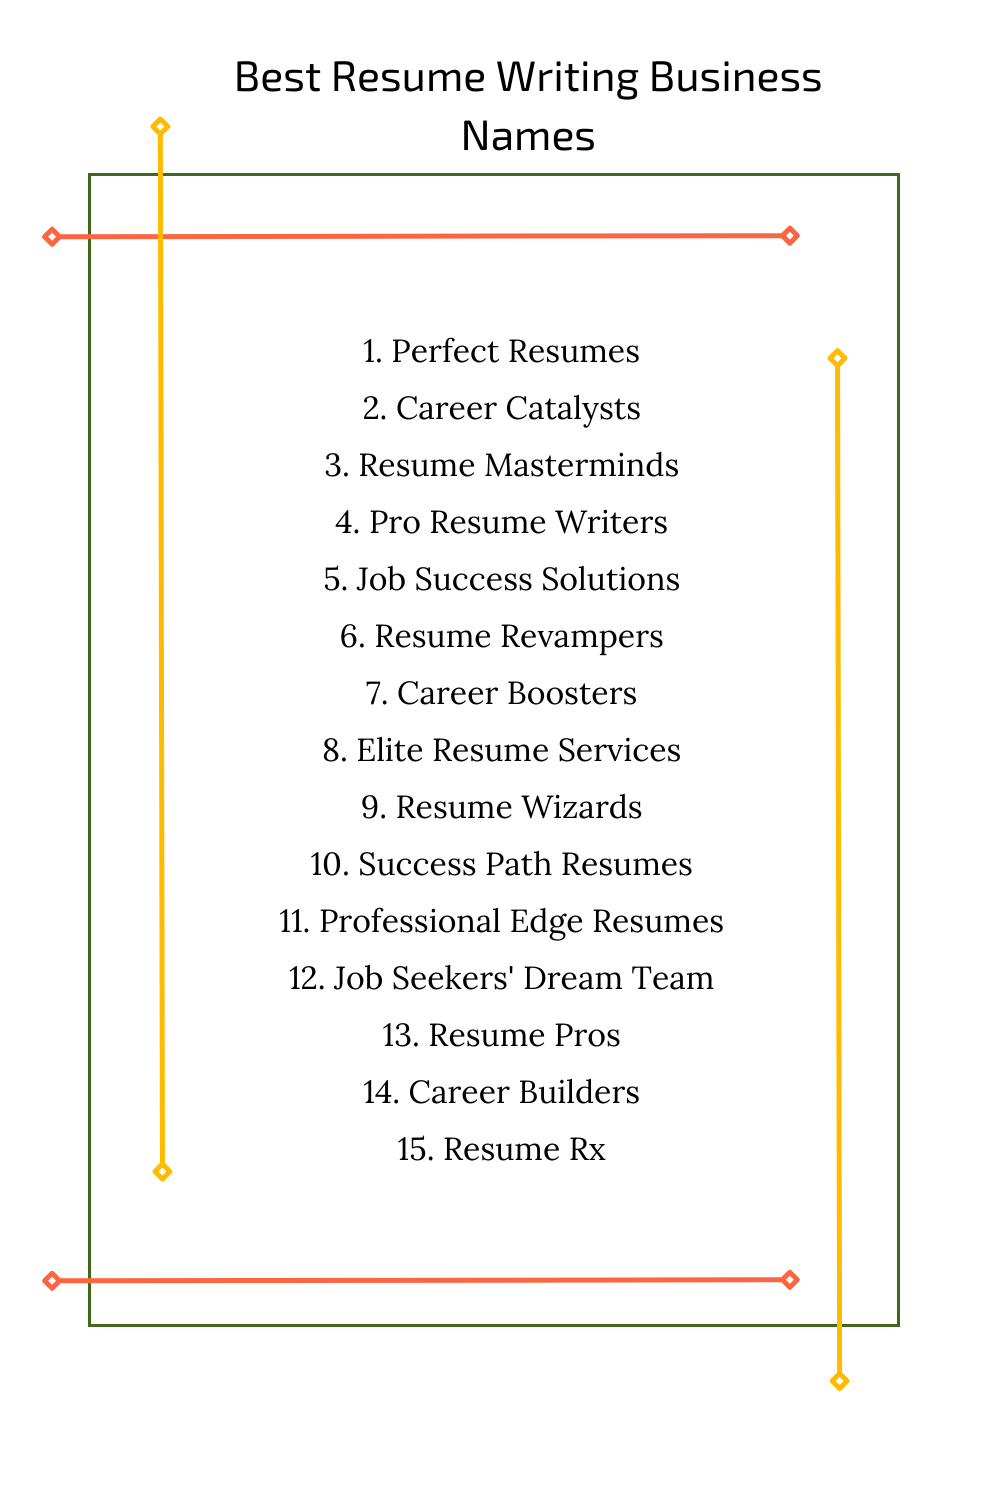 Best Resume Writing Business Names